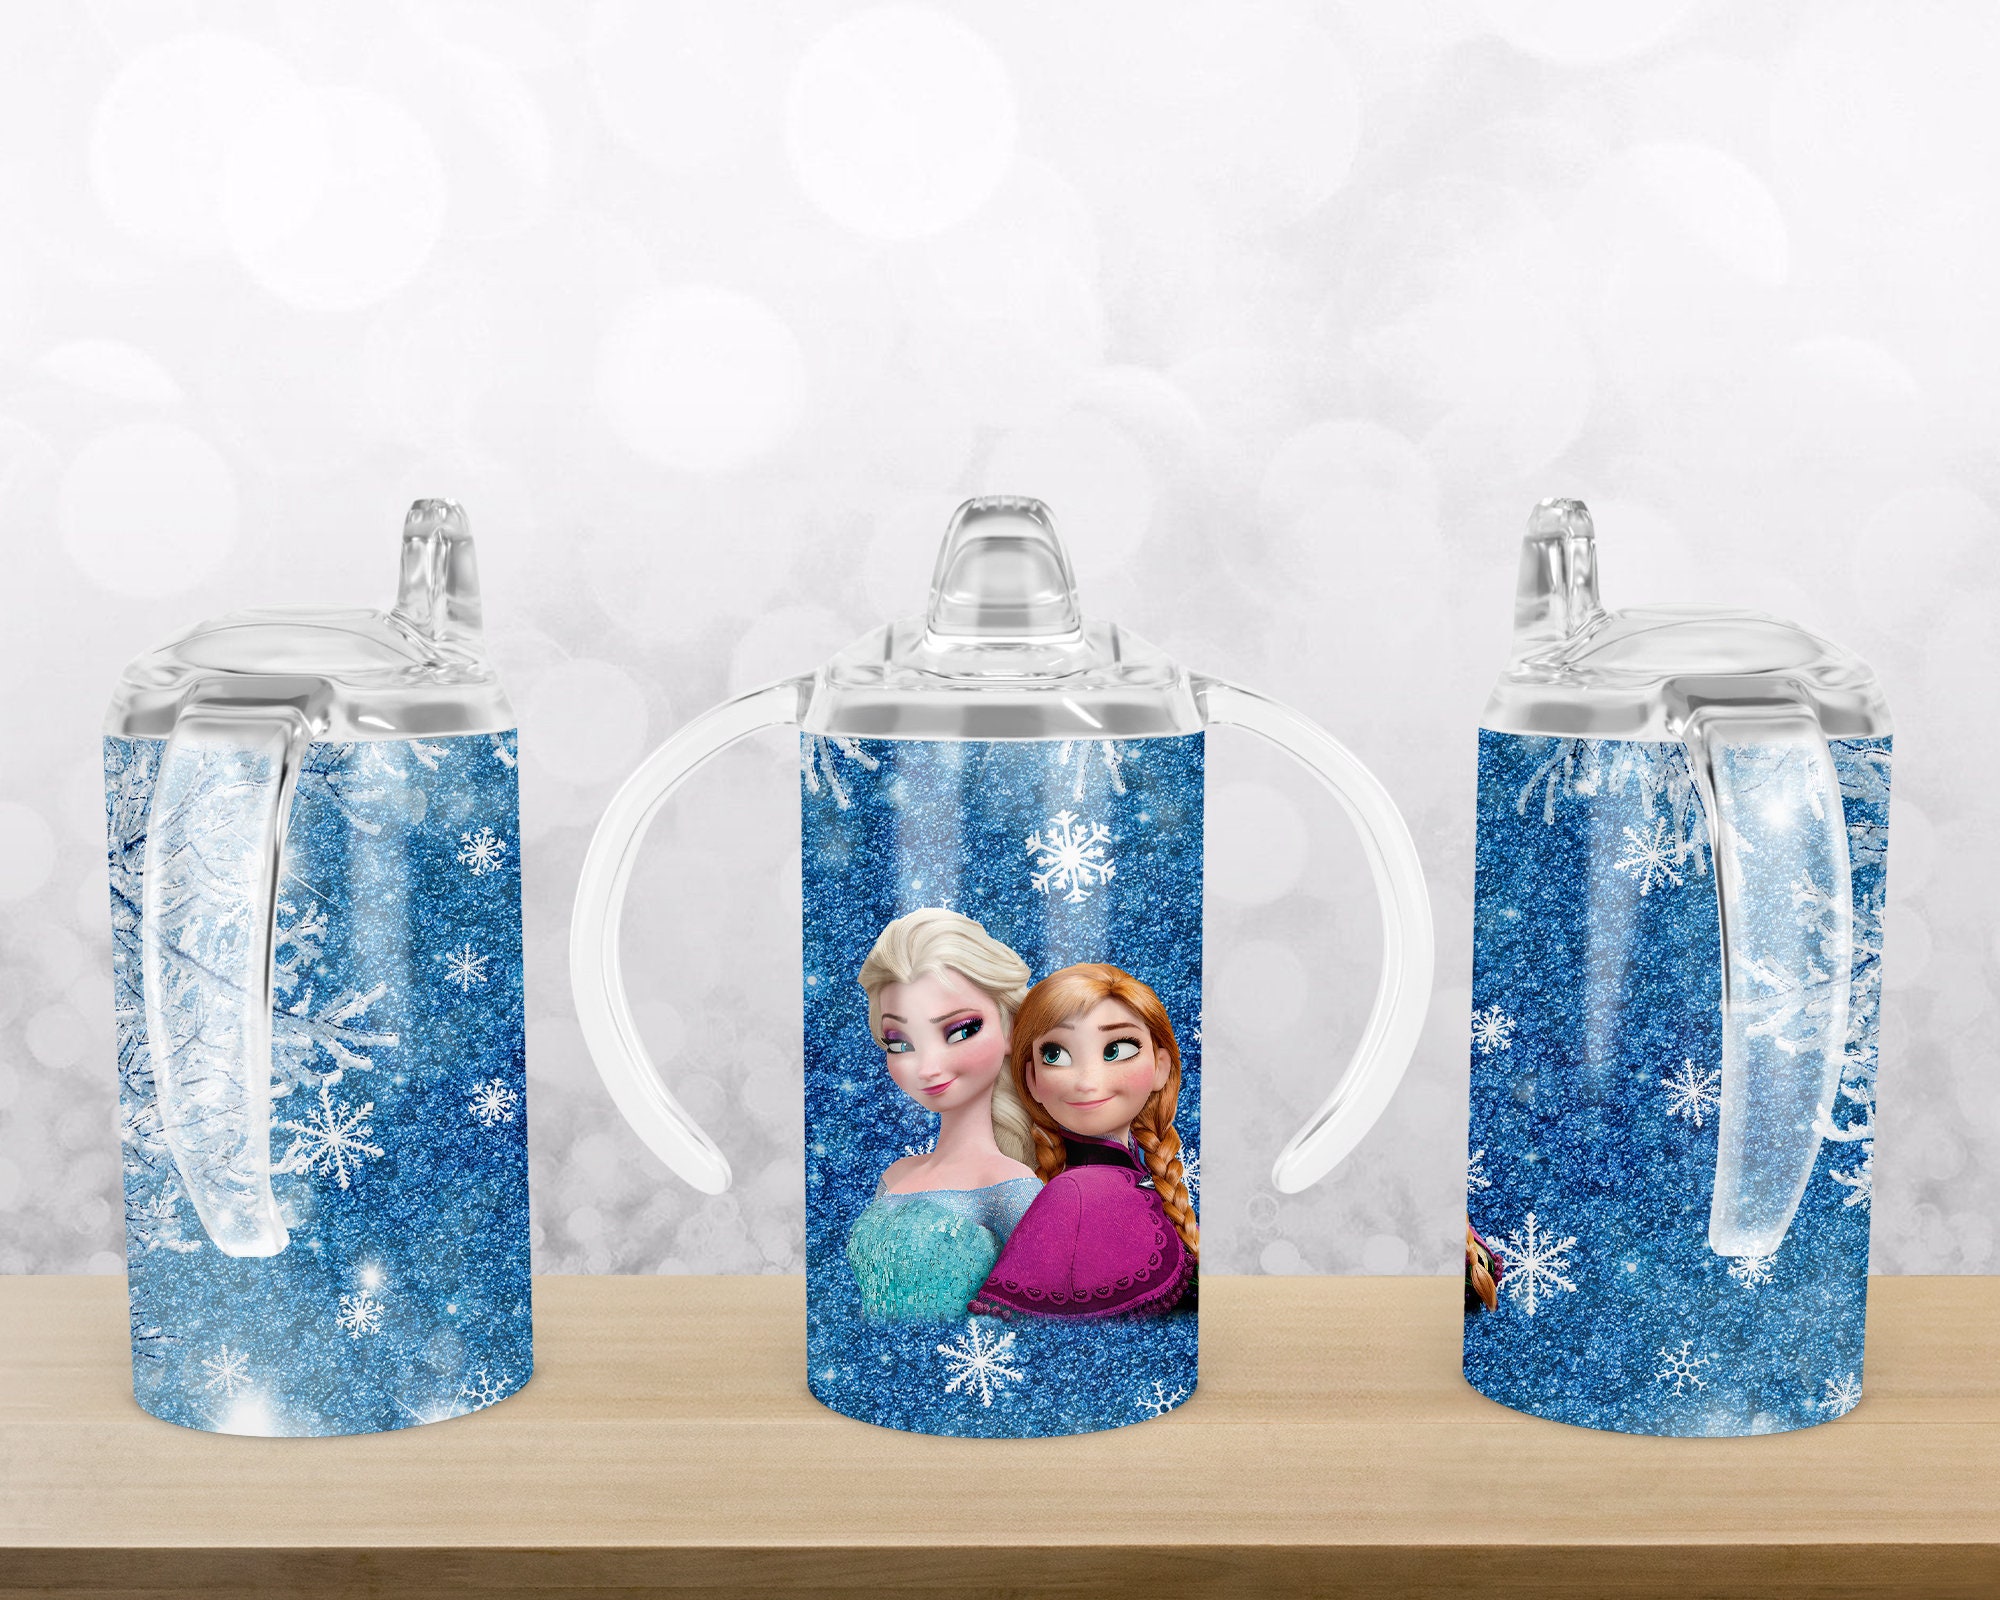 Disney - Elsa sippy cup(selected regions only) – b.box – b.box for